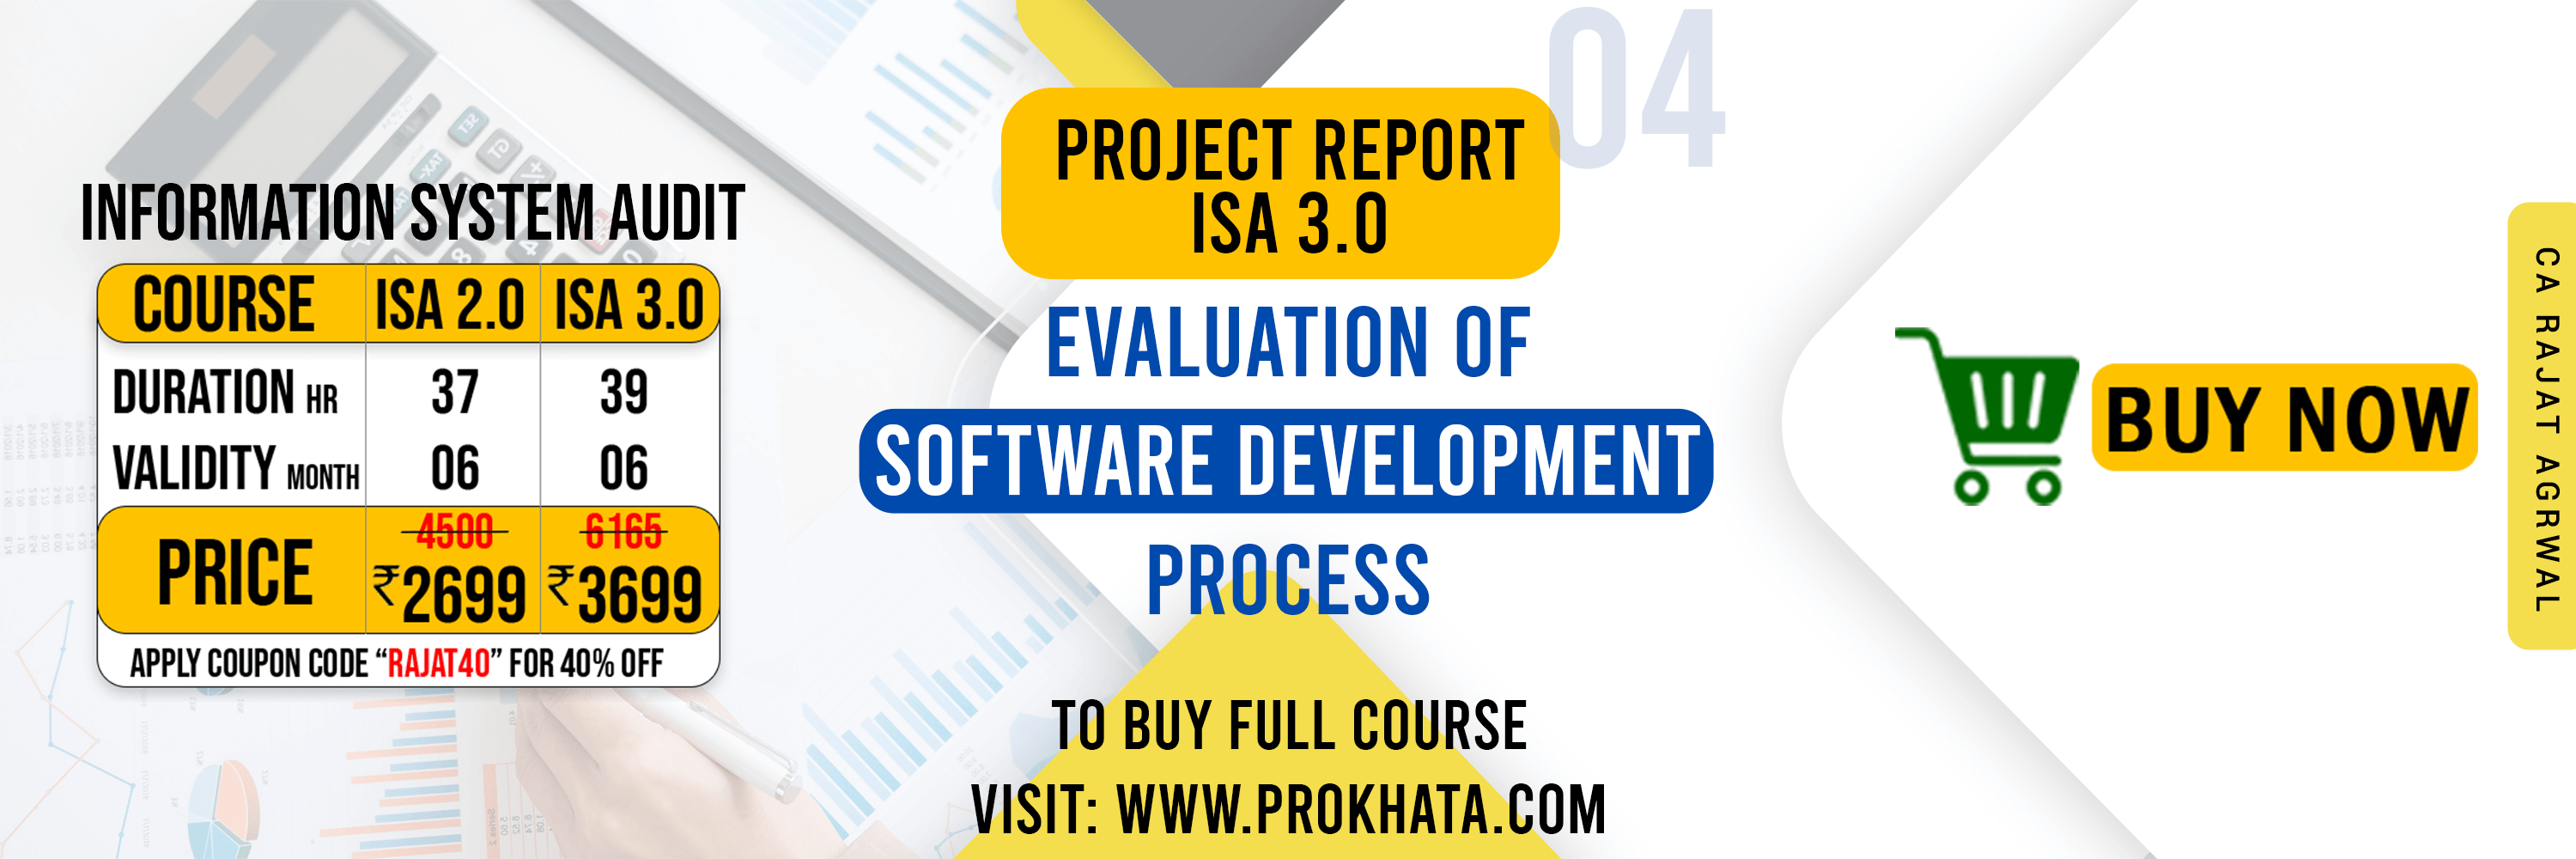 Project Report 04 EVALUATION OF Software Development Report